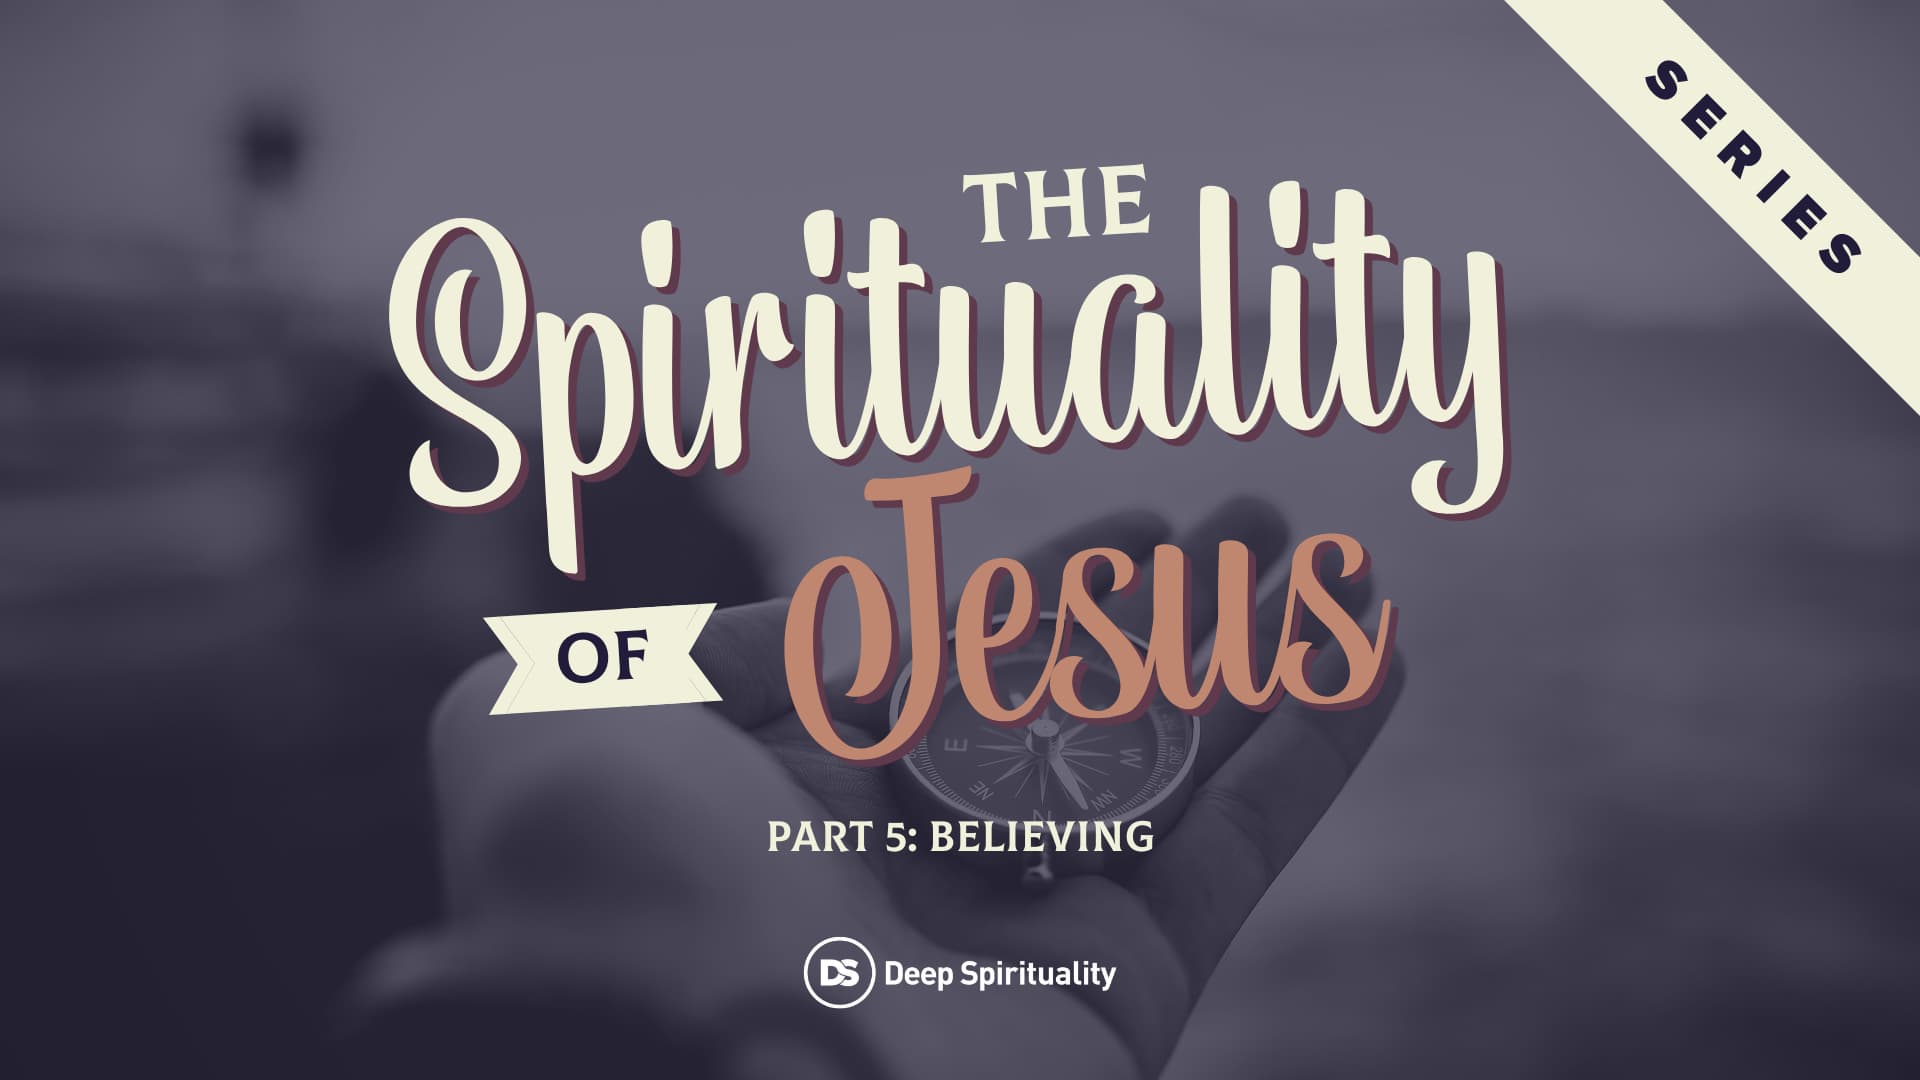 The Spirituality of Jesus, Part 5: Believing 1